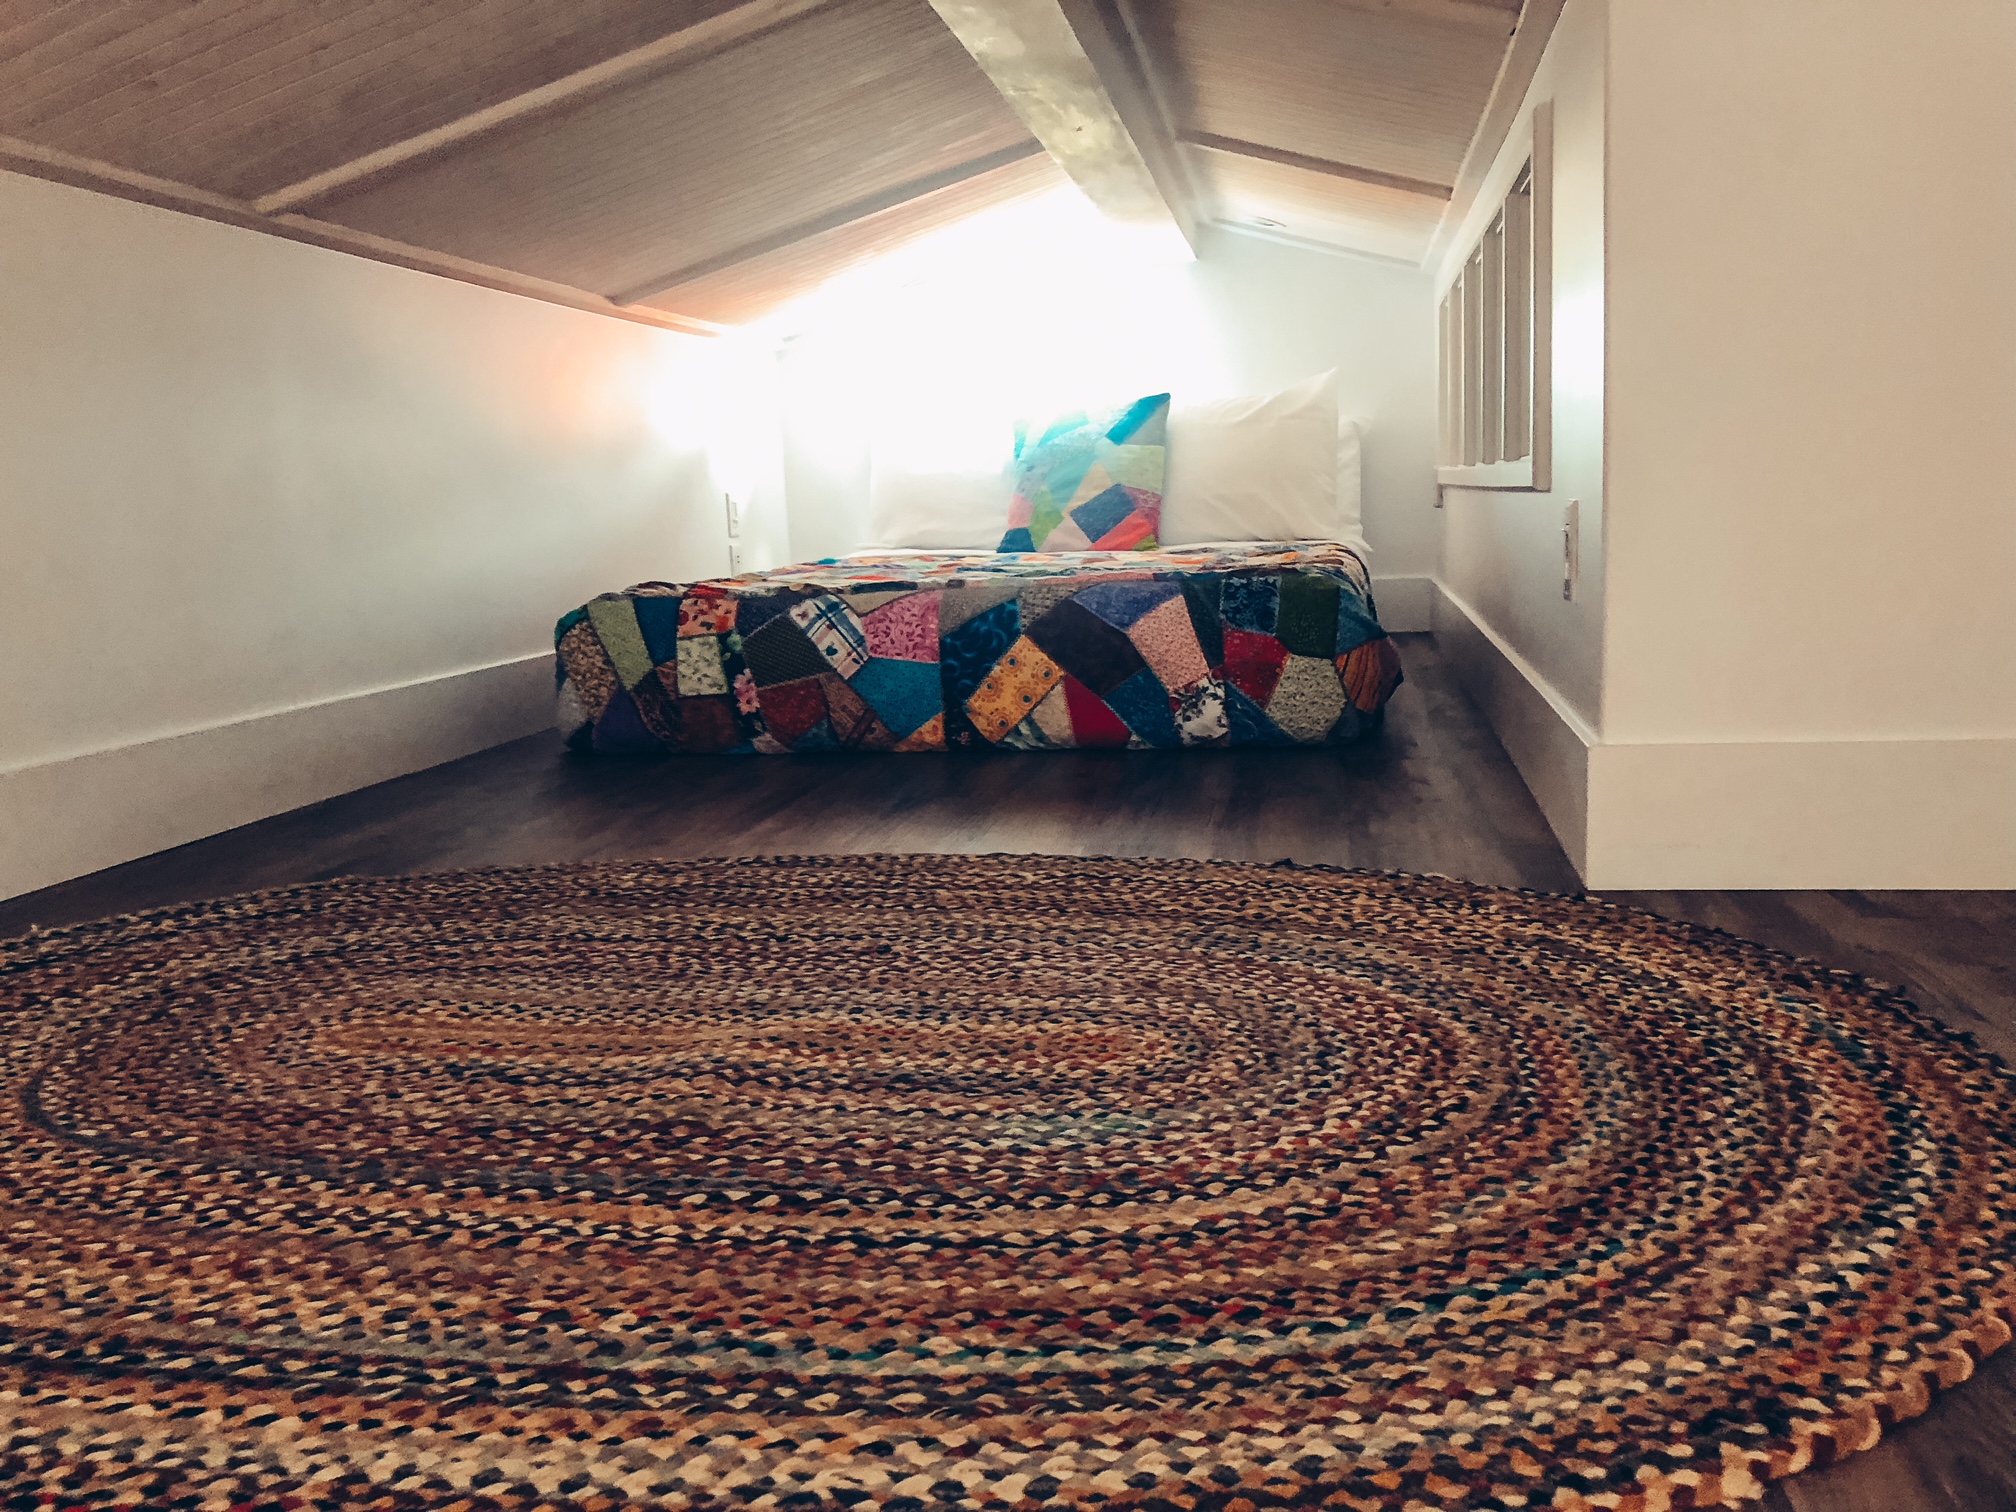 A photo of the double bed on the floor of the loft with a rug in front of it.